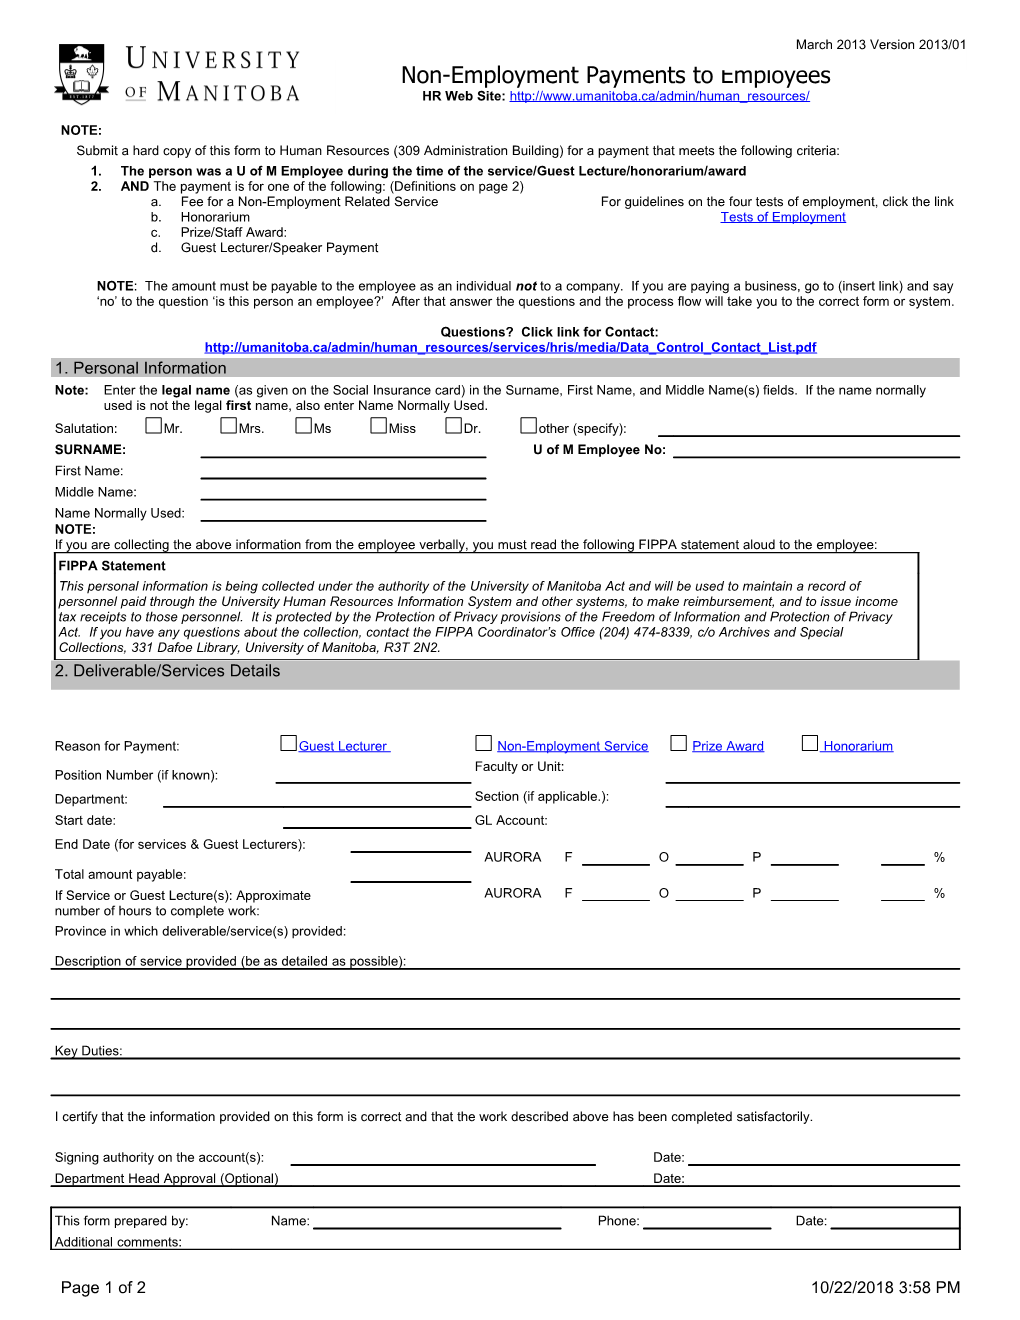 Submit a Hard Copy of This Form to Human Resources(309 Administration Building) for a Payment